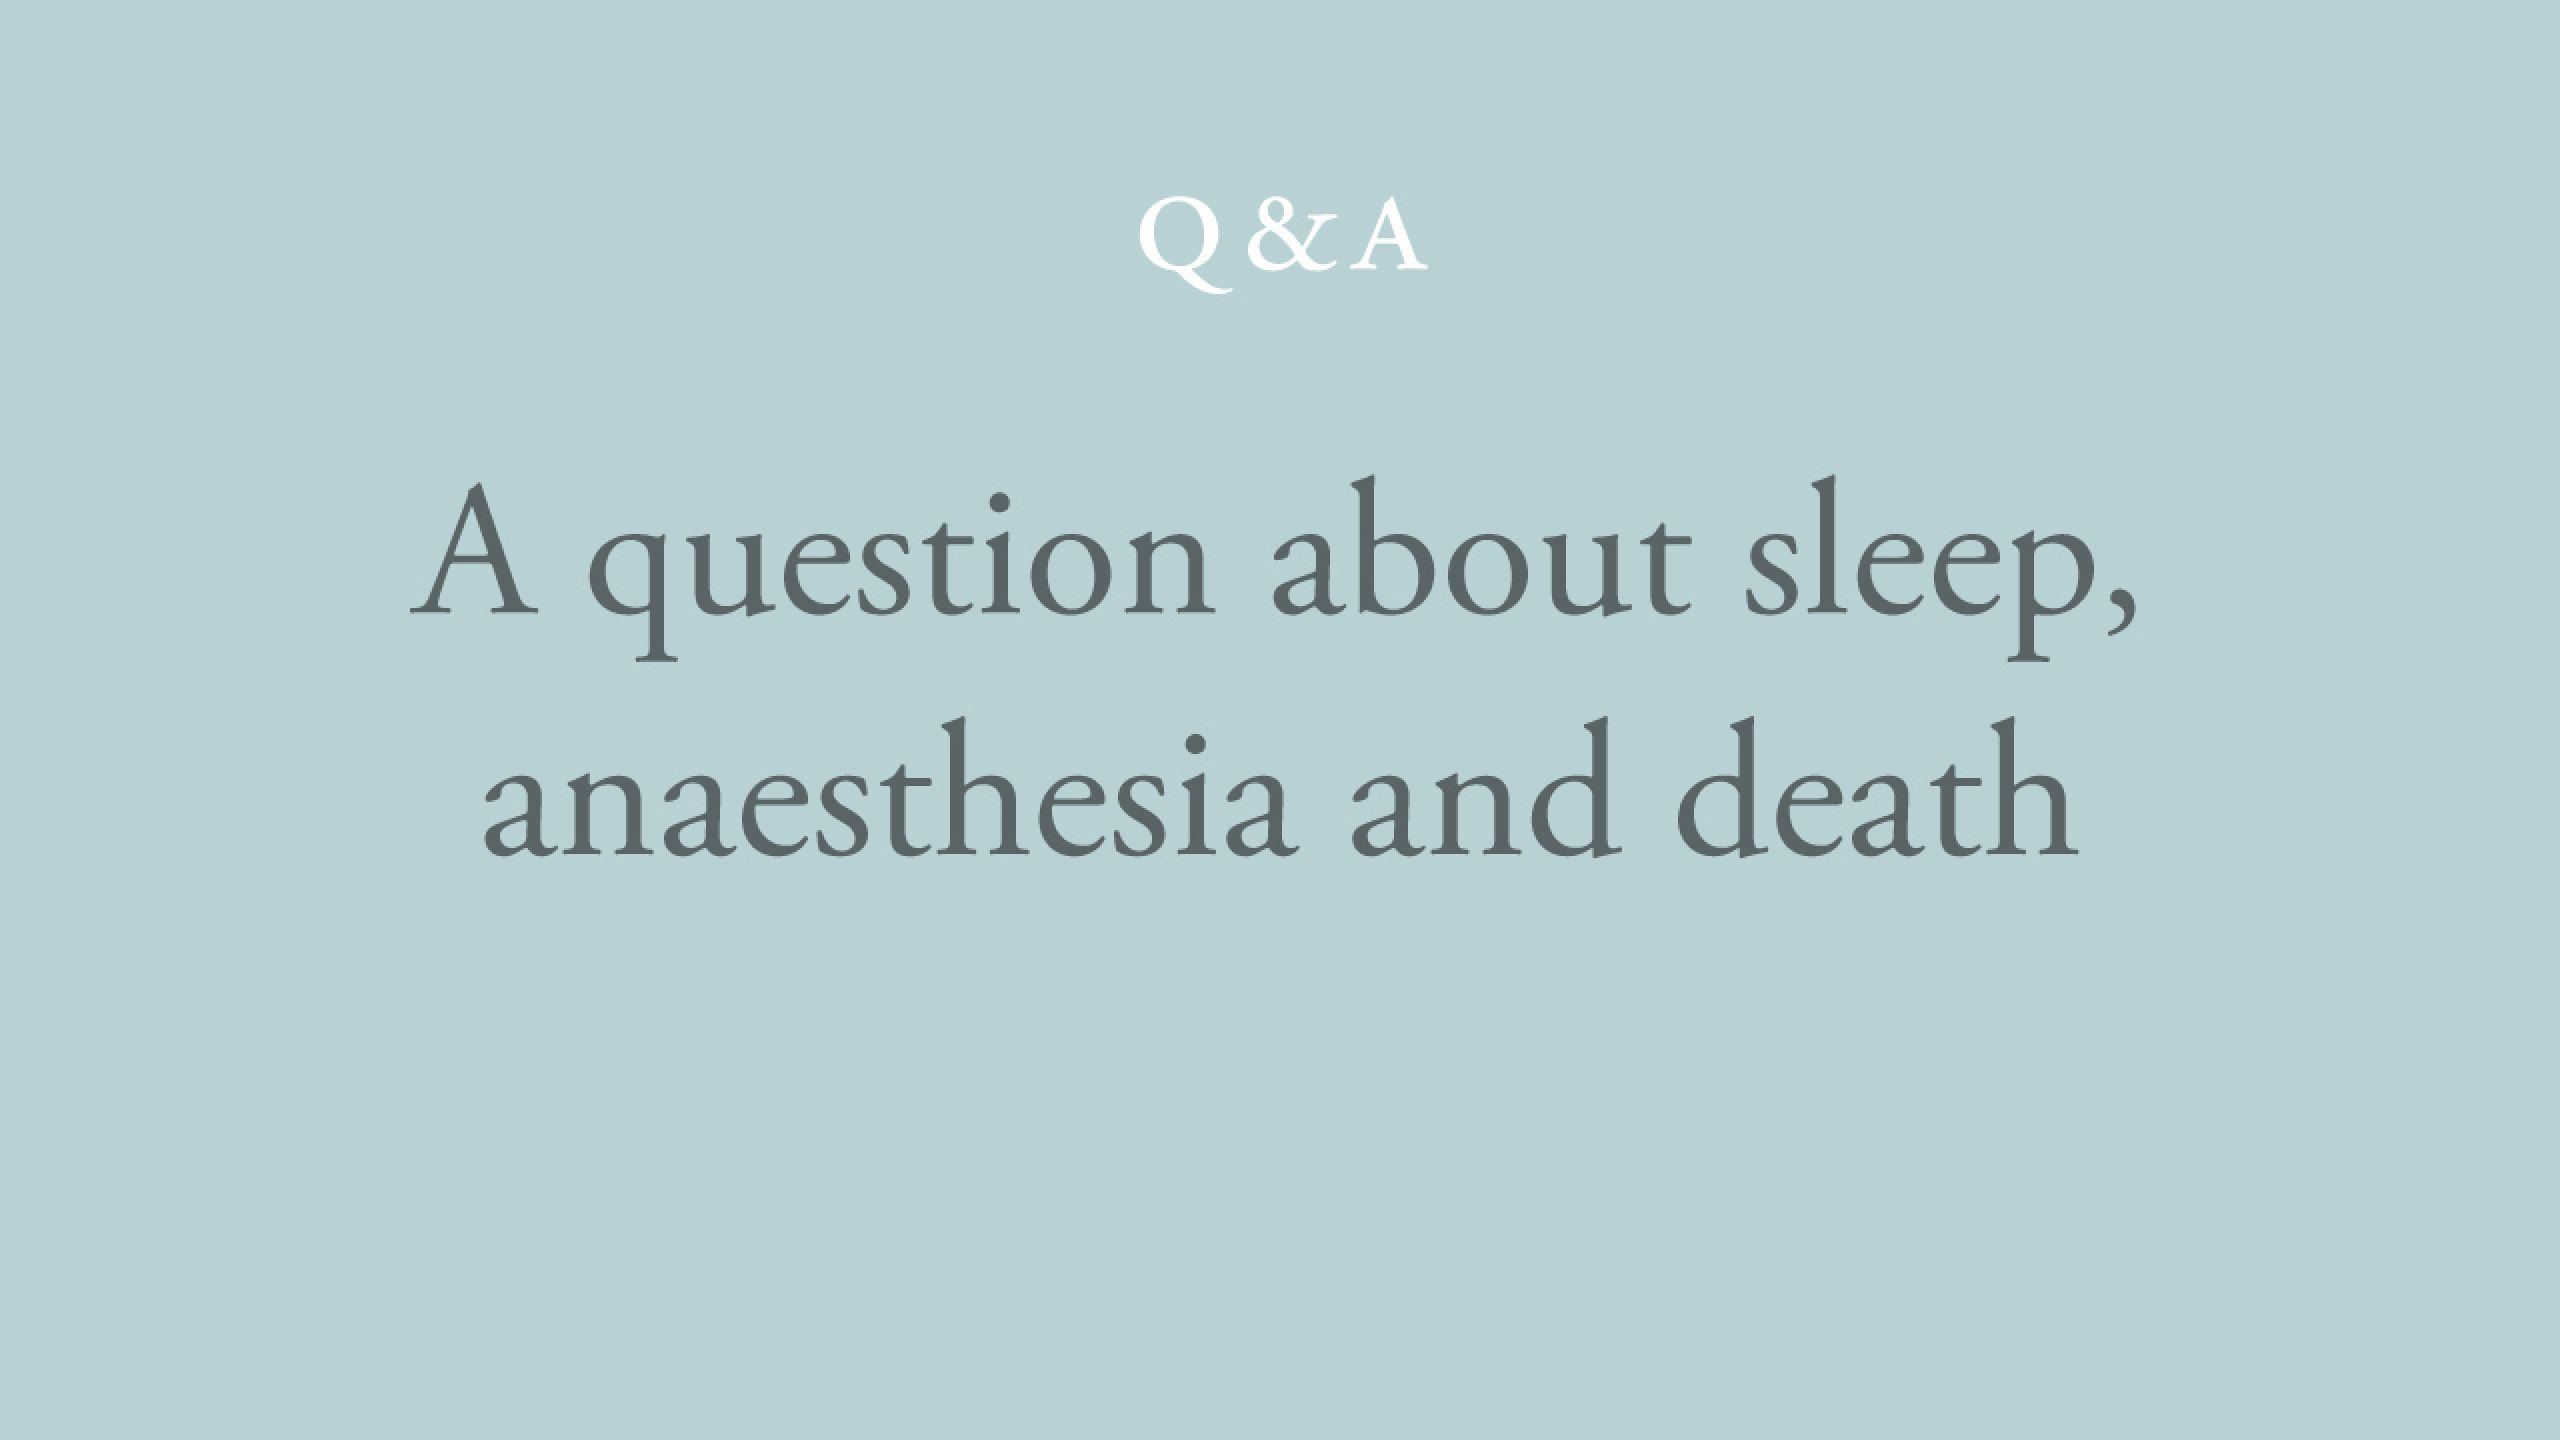 Consciousness remains the same in deep sleep, anaesthesia and death